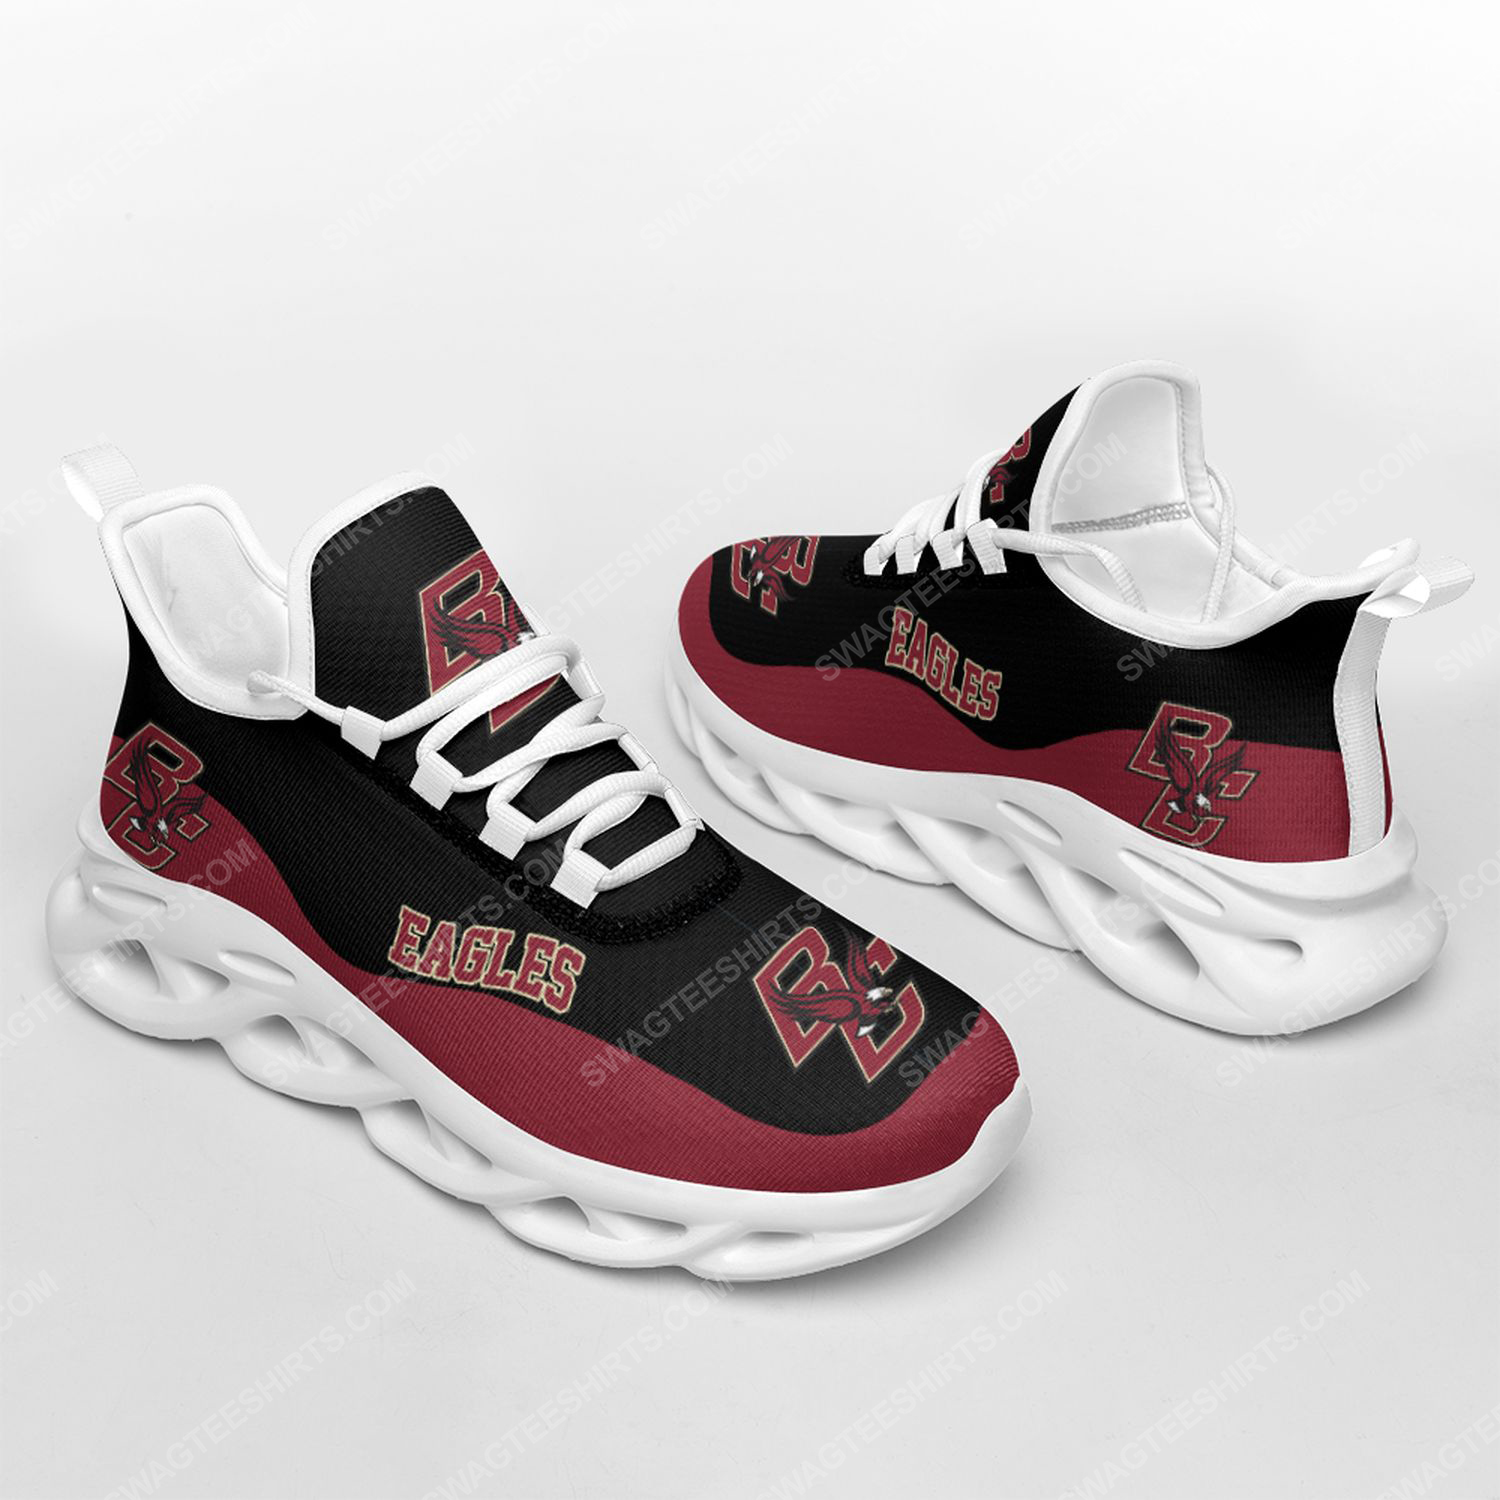 [special edition] The boston college eagles football team max soul shoes – Maria